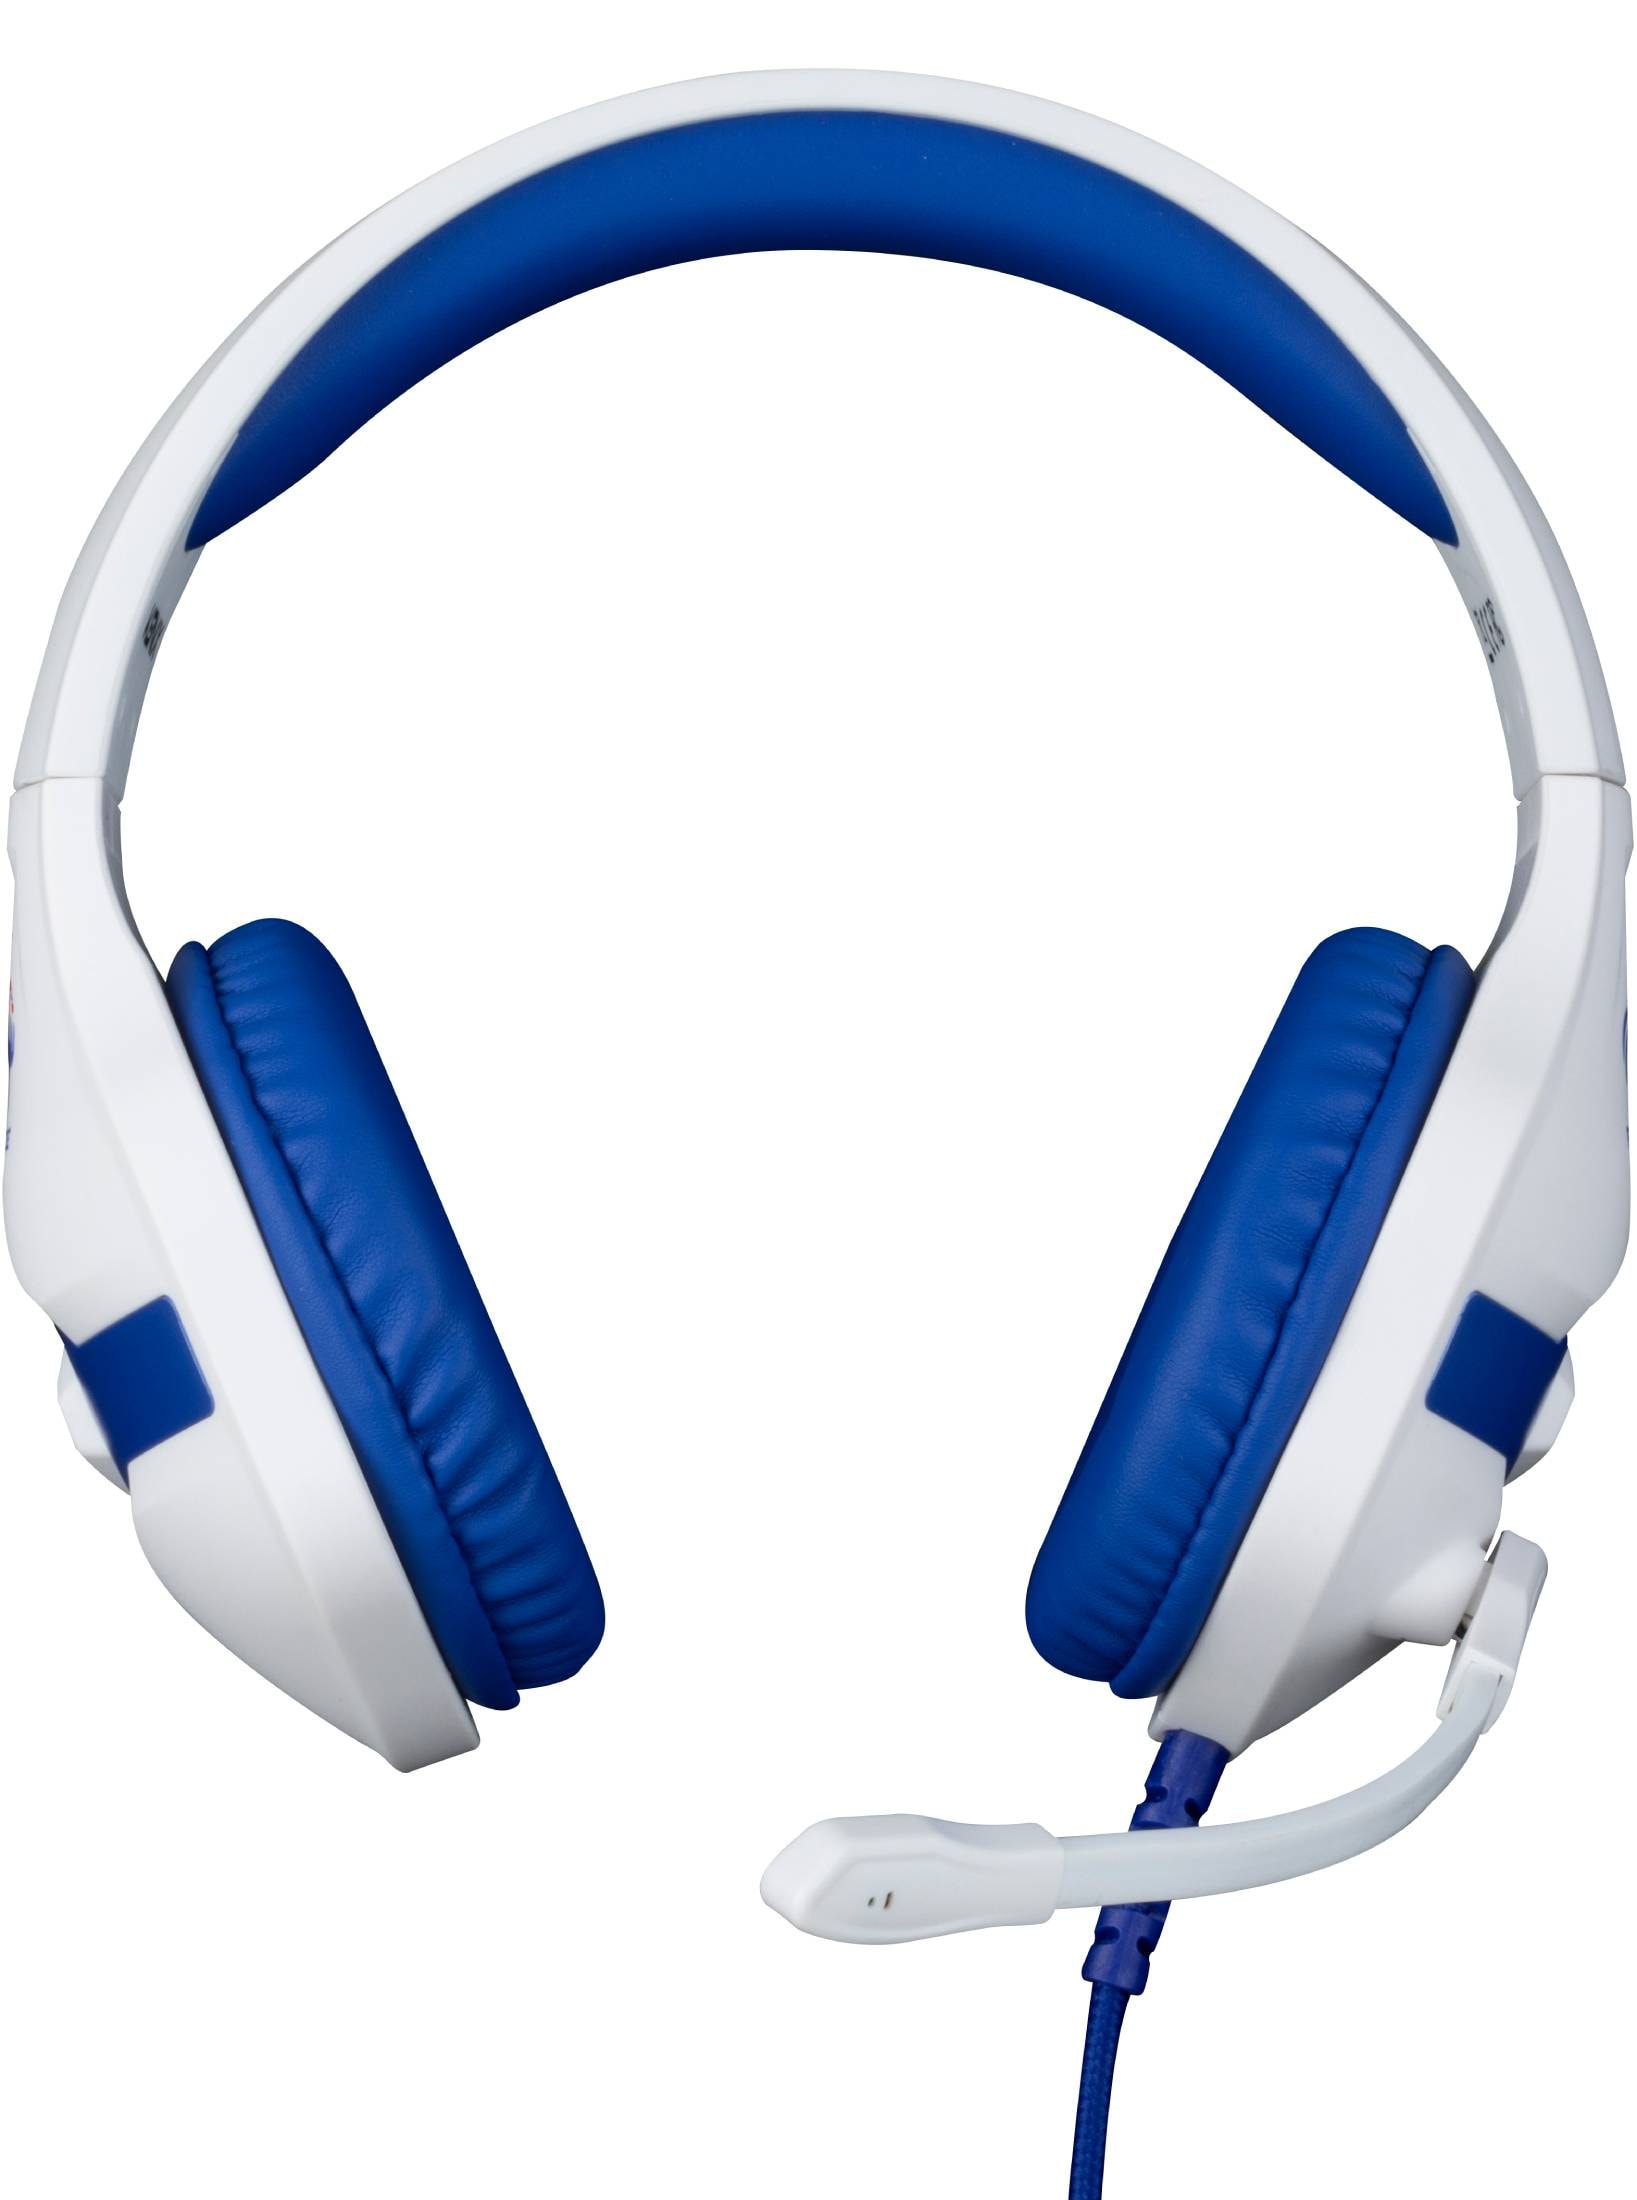 Micro Casque Gaming Filaire Subsonic Pour Console Ps5 Blanc